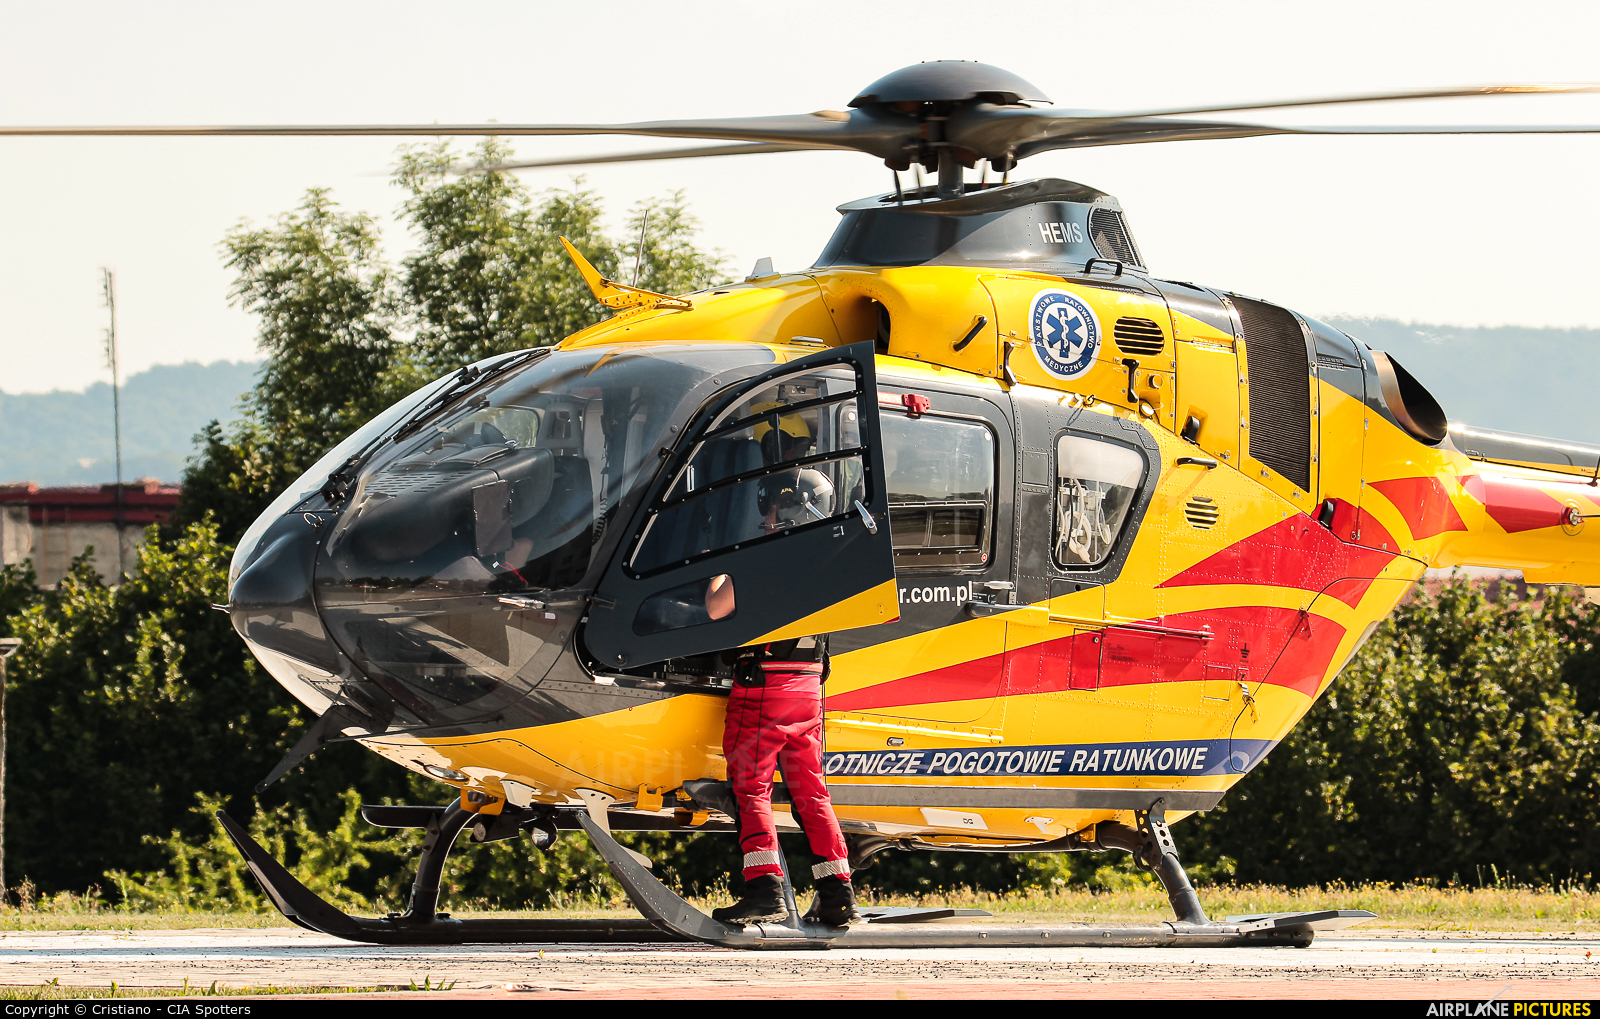 Polish Medical Air Rescue - Lotnicze Pogotowie Ratunkowe SP-HXT aircraft at Off Airport - Poland